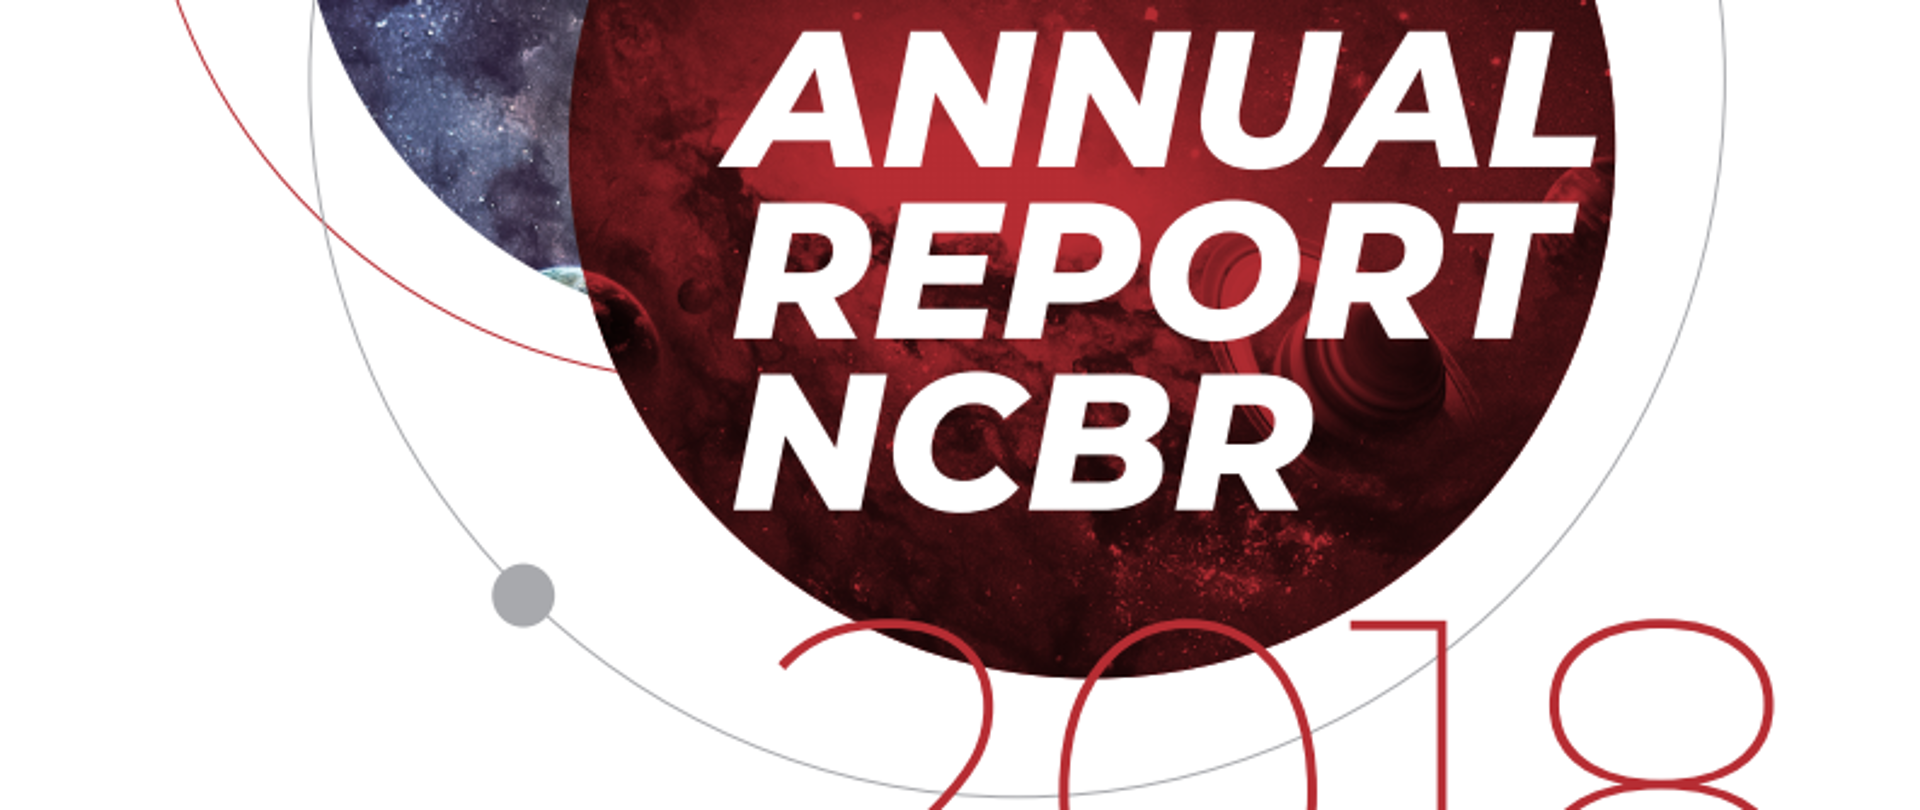 Two circles imitating planets. In front inscription "Annual Report NCBR 2018"